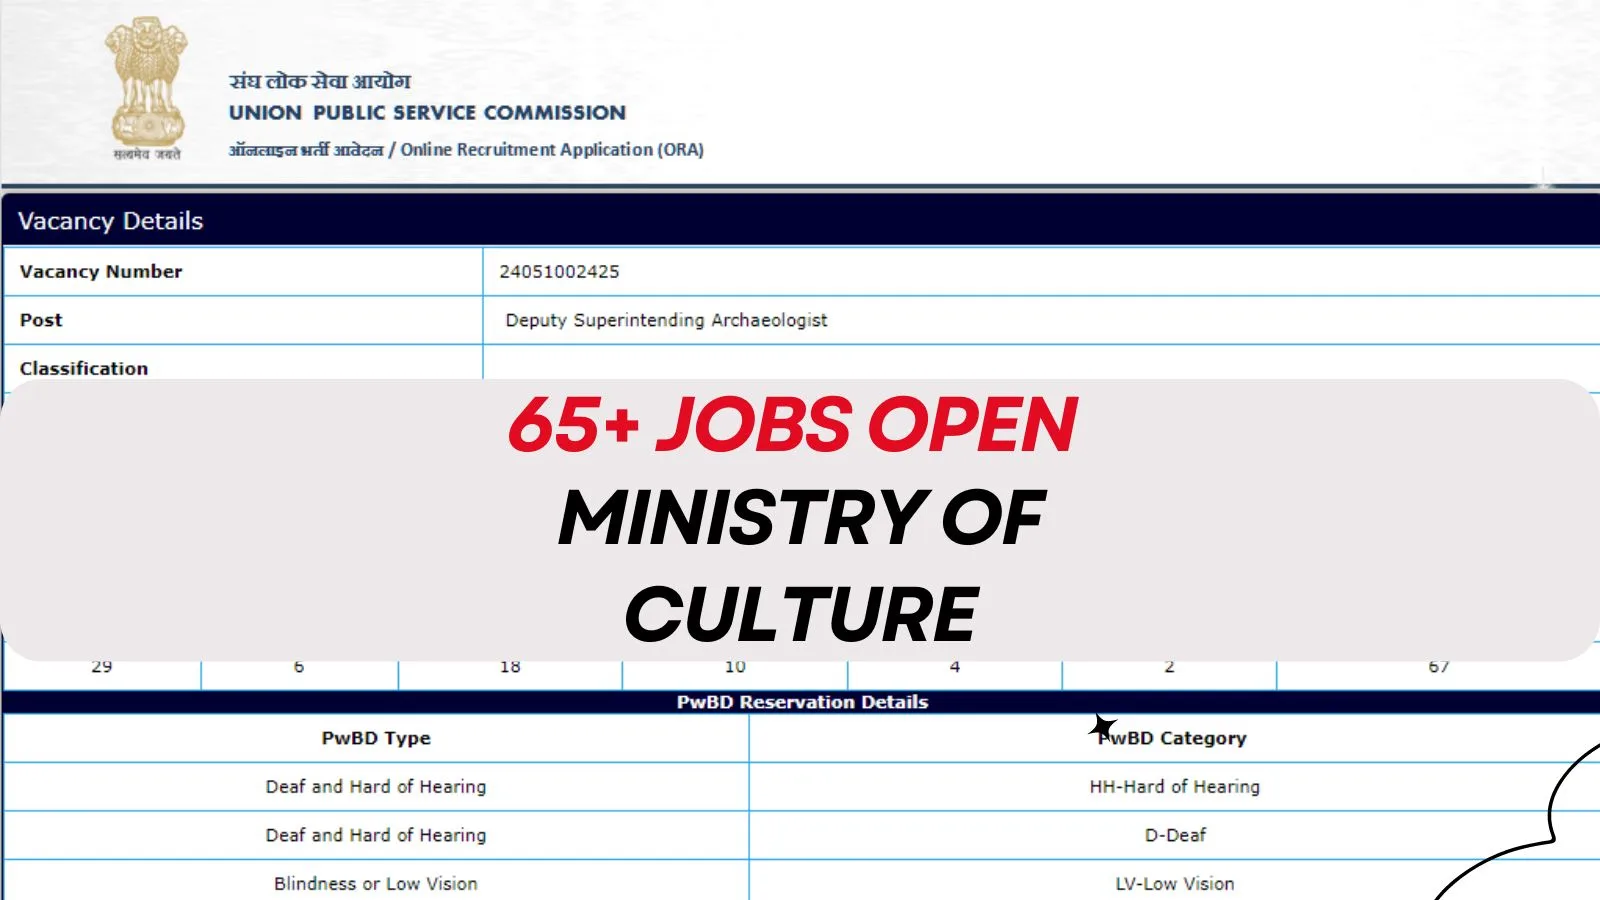 65+ Jobs Open in Ministry of Culture by UPSC, Check Details here!